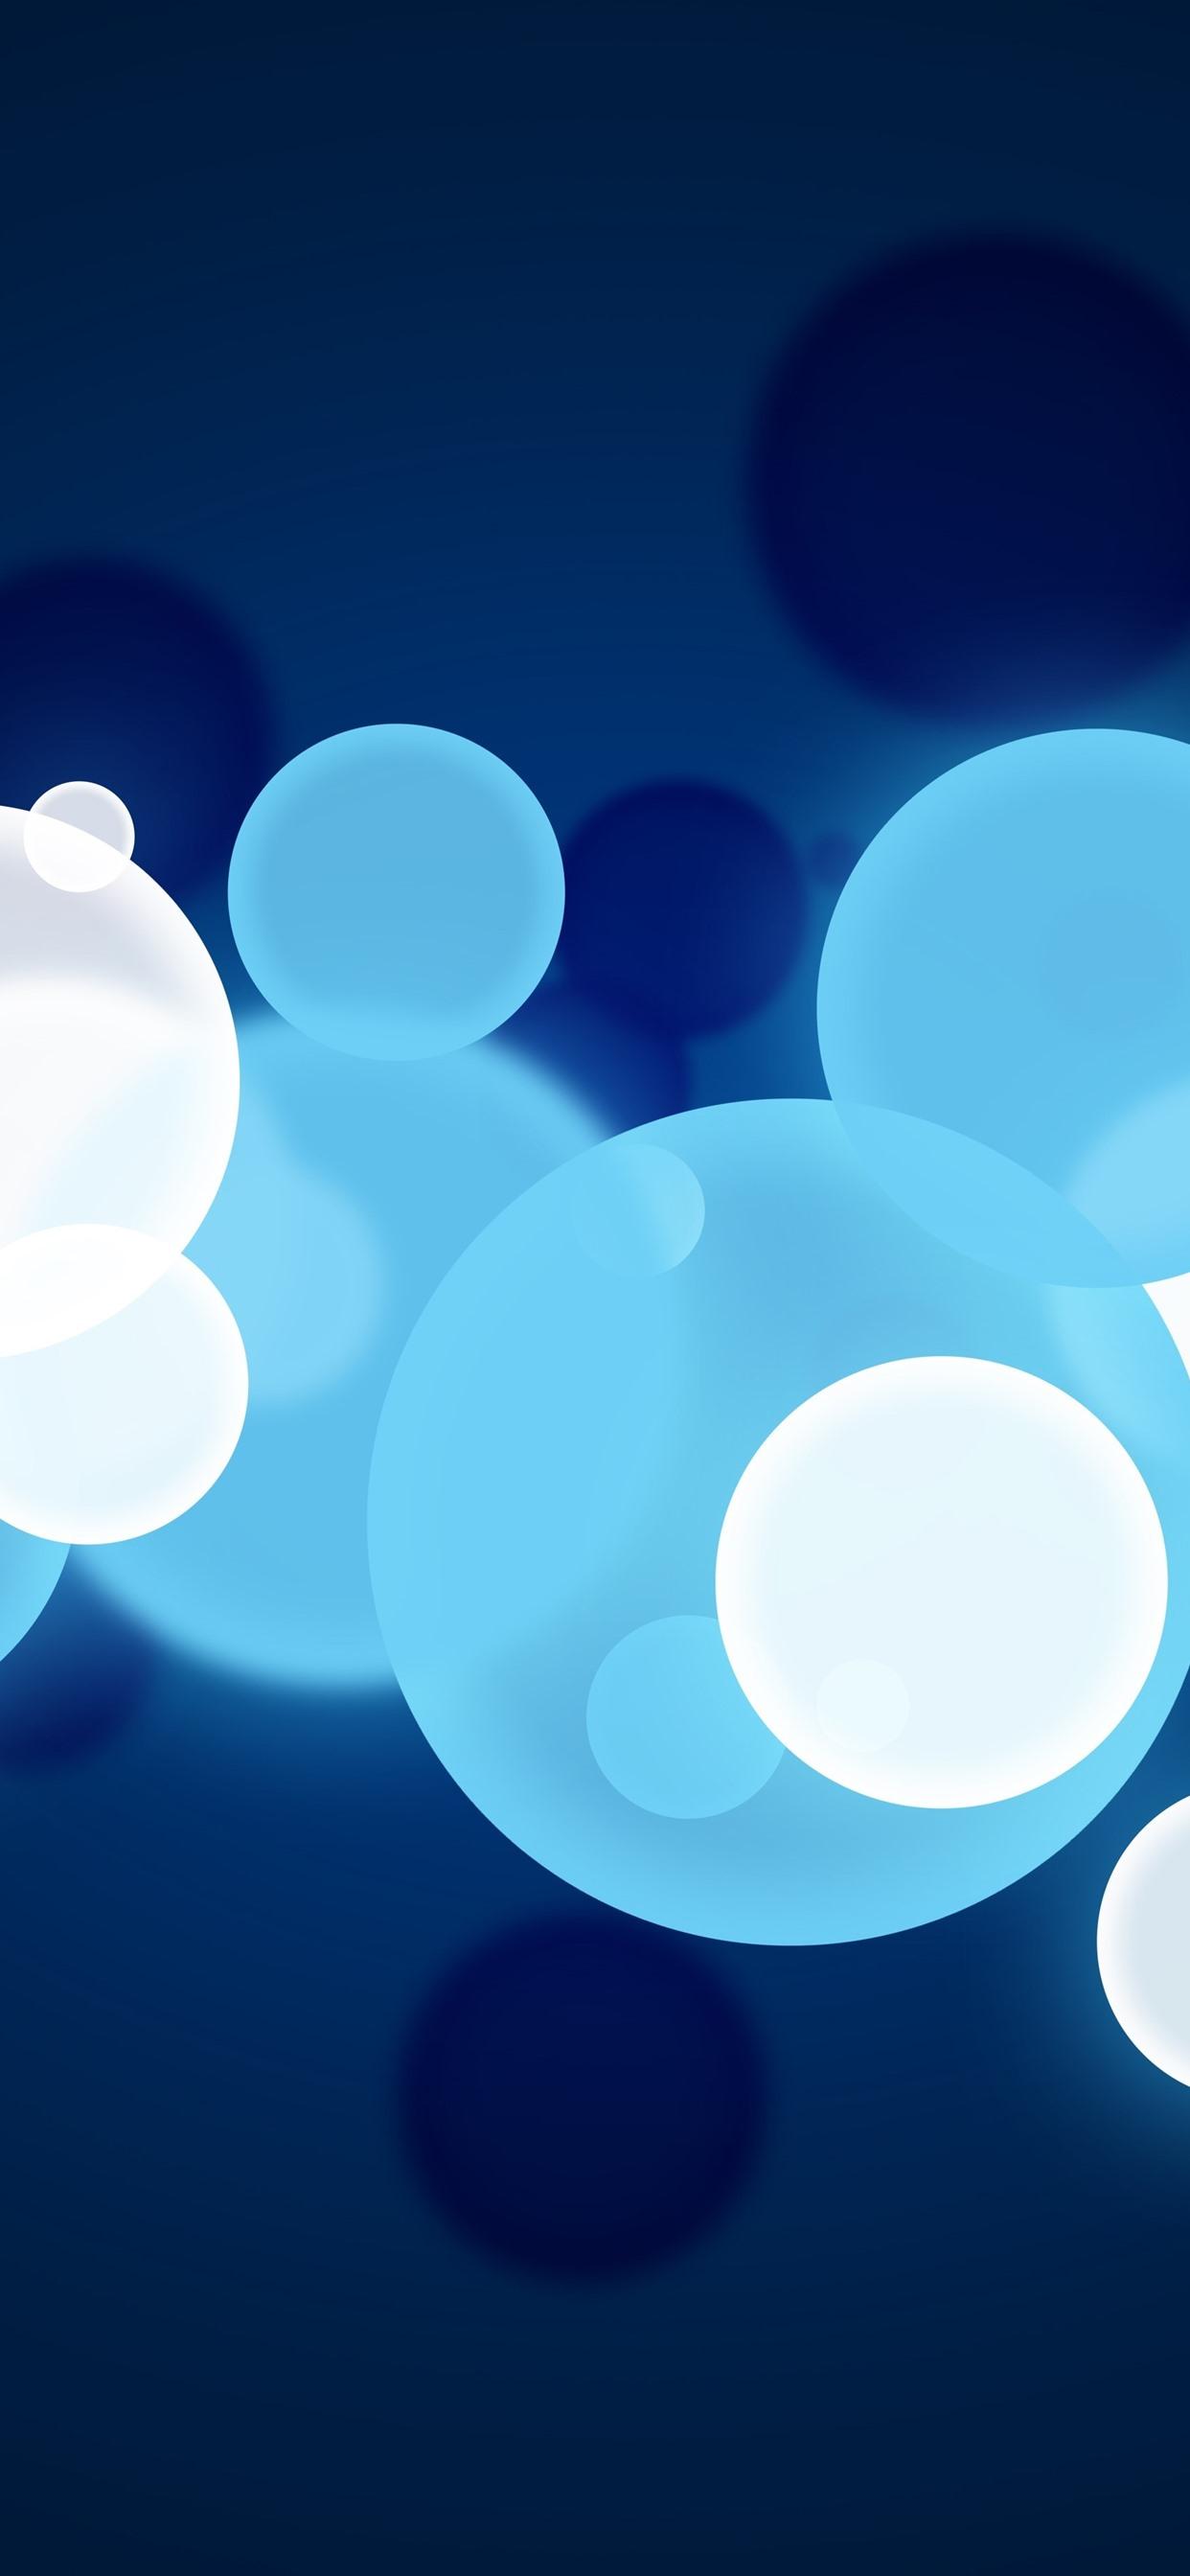 Blue and white bubbles, abstract 1242x2688 iPhone XS Max wallpaper